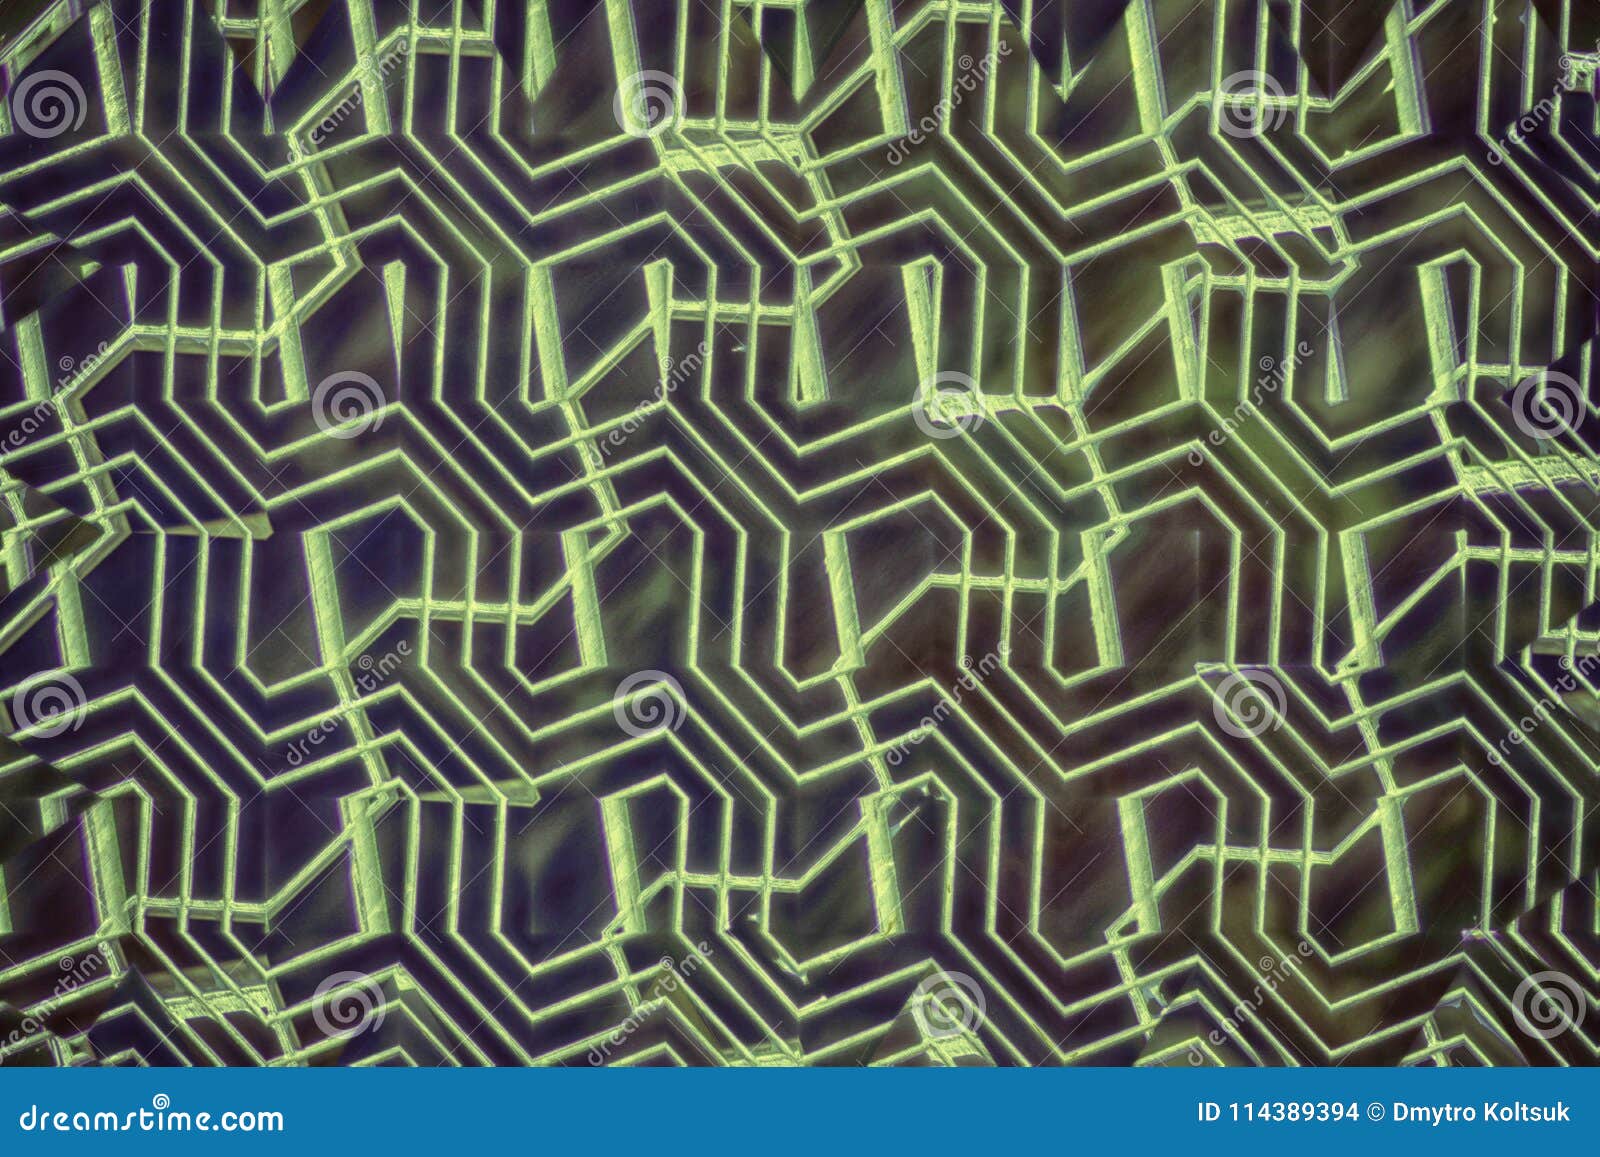 ion fabric texture, futuristic textile background in golden lime color